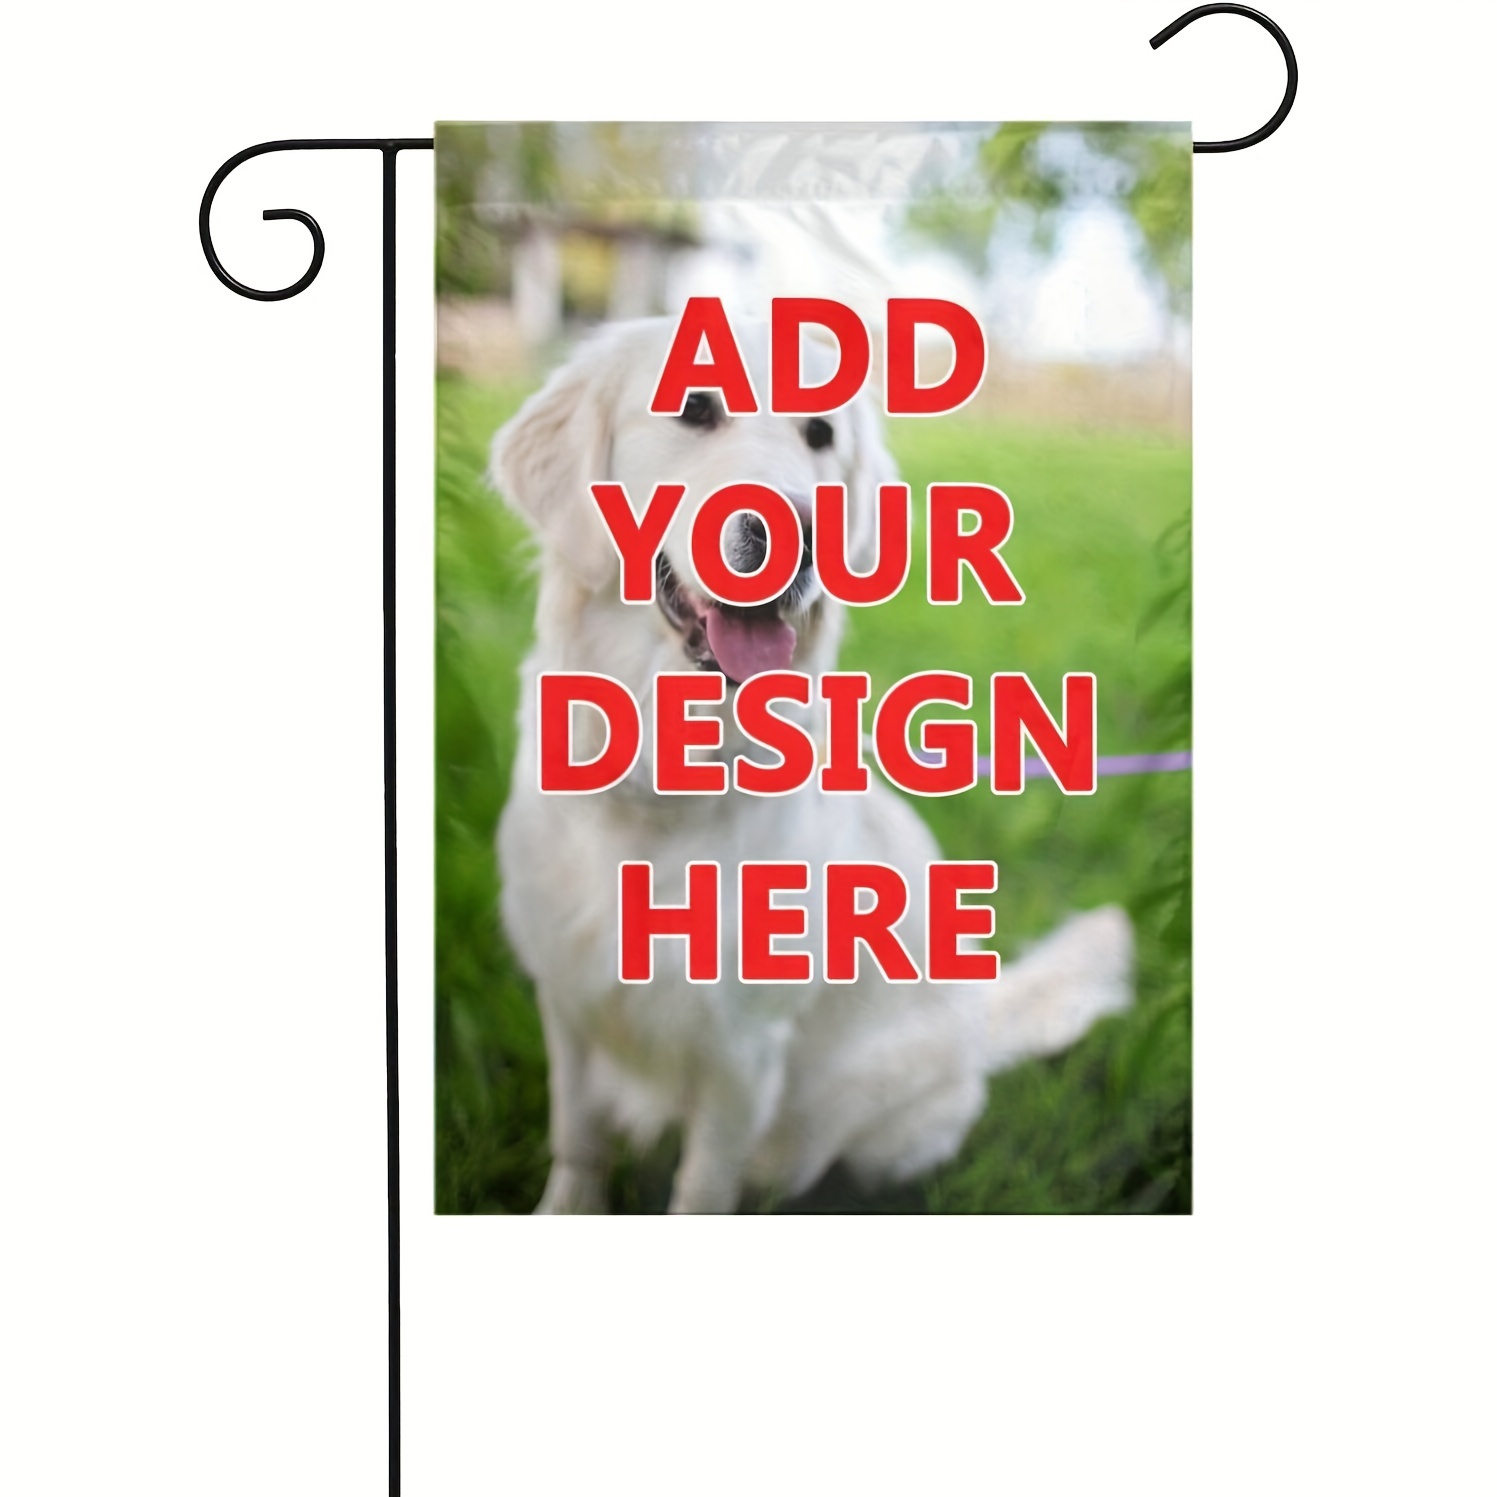 

No Flagpole Custom Garden Flags, Personalized Memorial Garden Flags With Your Own Photo, Customized Home Decorative Outside Flags Customizable Dogs/pets Yard Flag